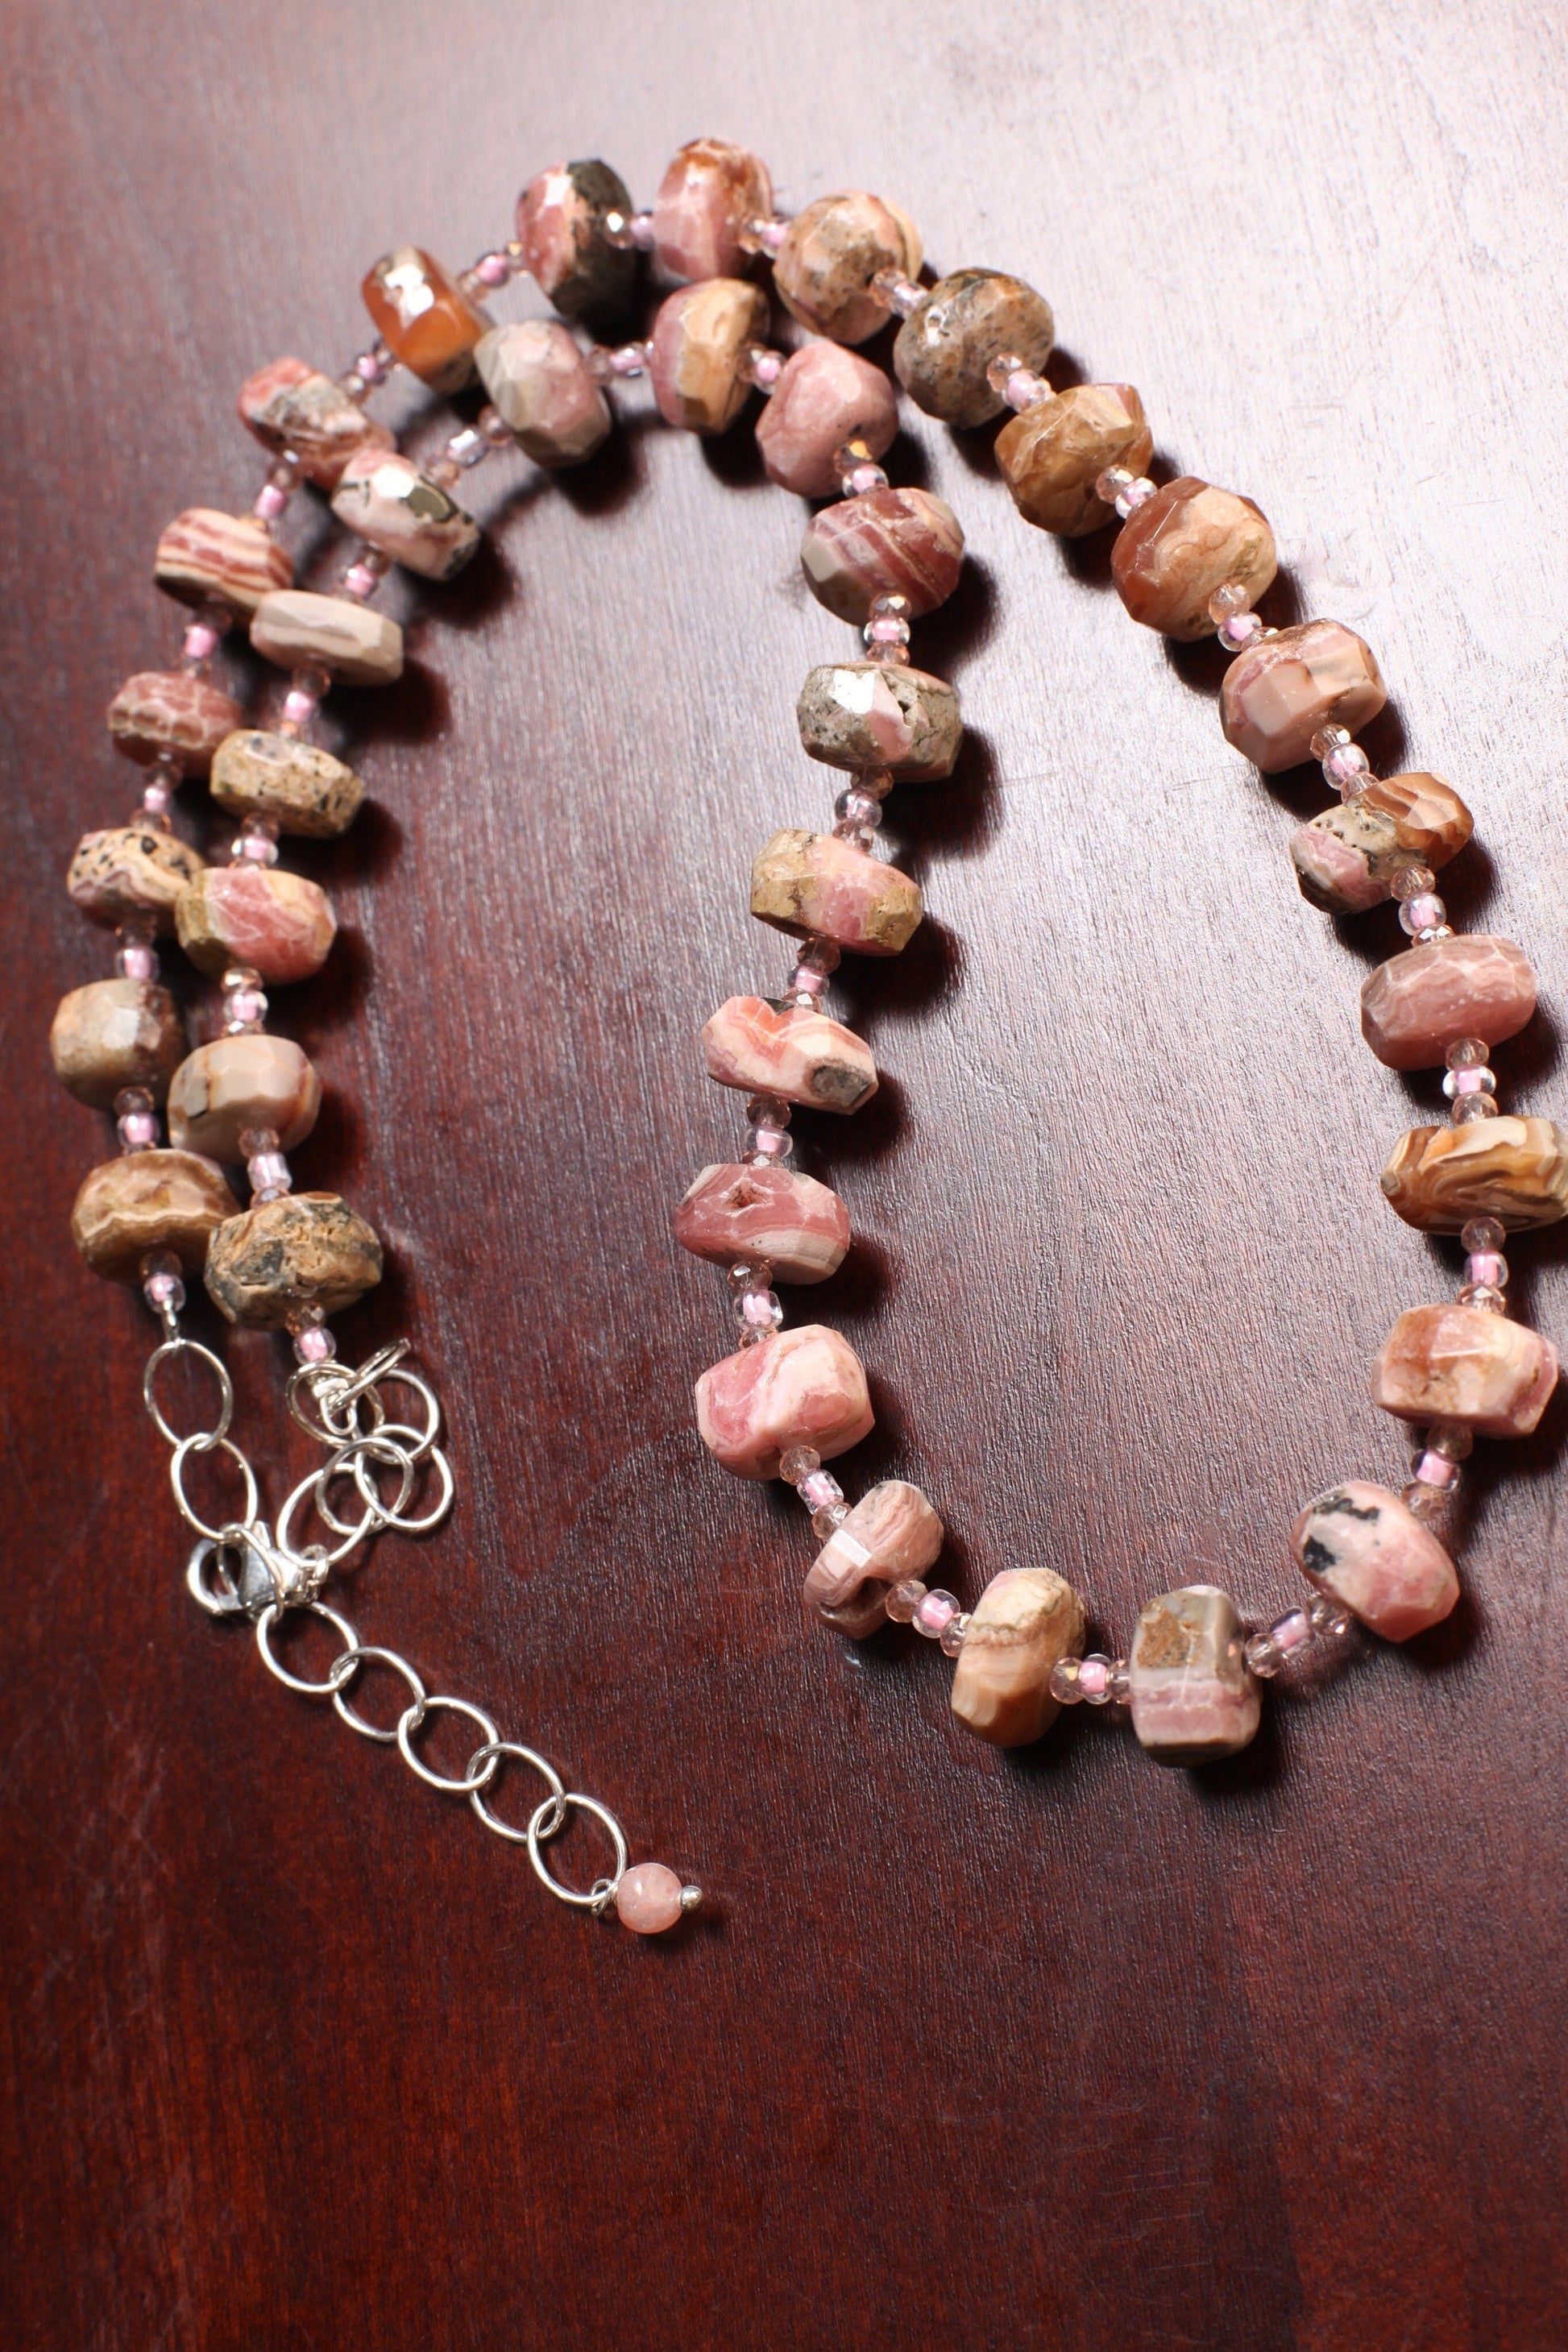 Argentina Rhodochrosite Faceted Rondelle 6x11mm Necklace, Pink Quartz Spacers, 925 Sterling Silver 20.5&quot; Necklace with 2&quot; Extension